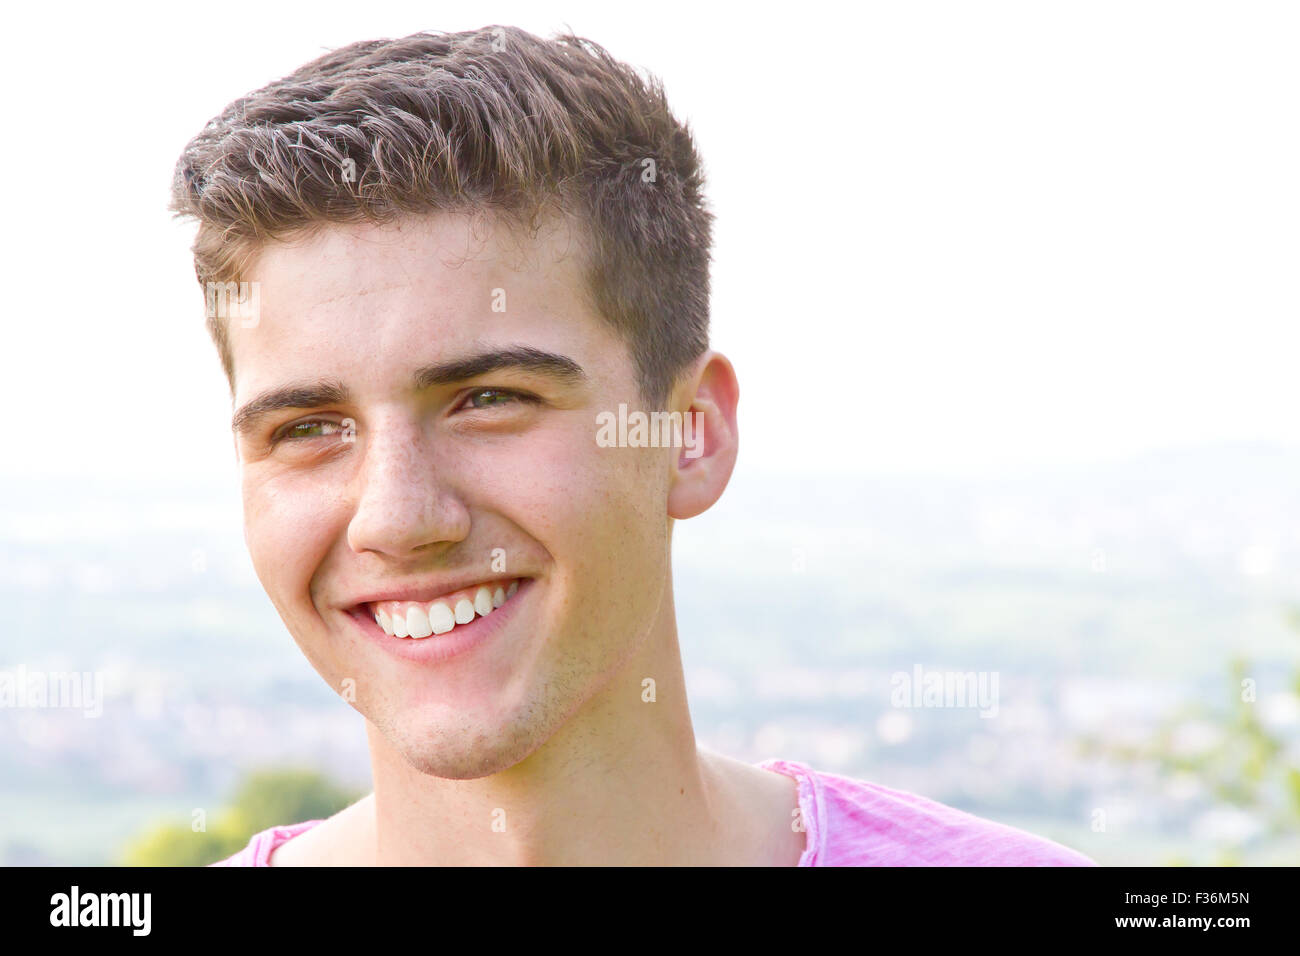 Portrait of young friendly man Stock Photo